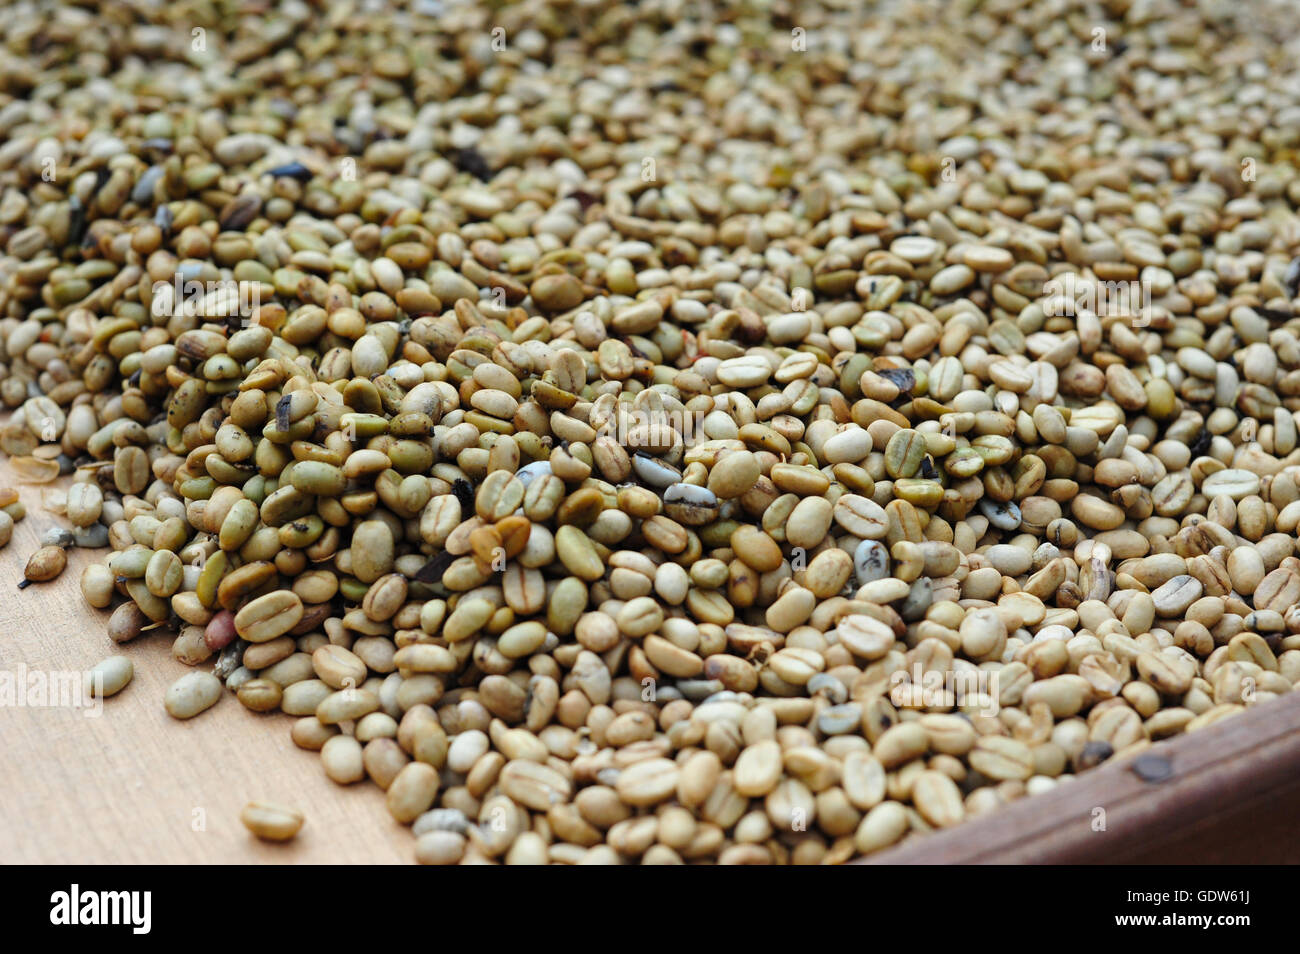 The famous Indonesian fermented luwak coffee beans, unprocessed, waiting to be roasted Stock Photo